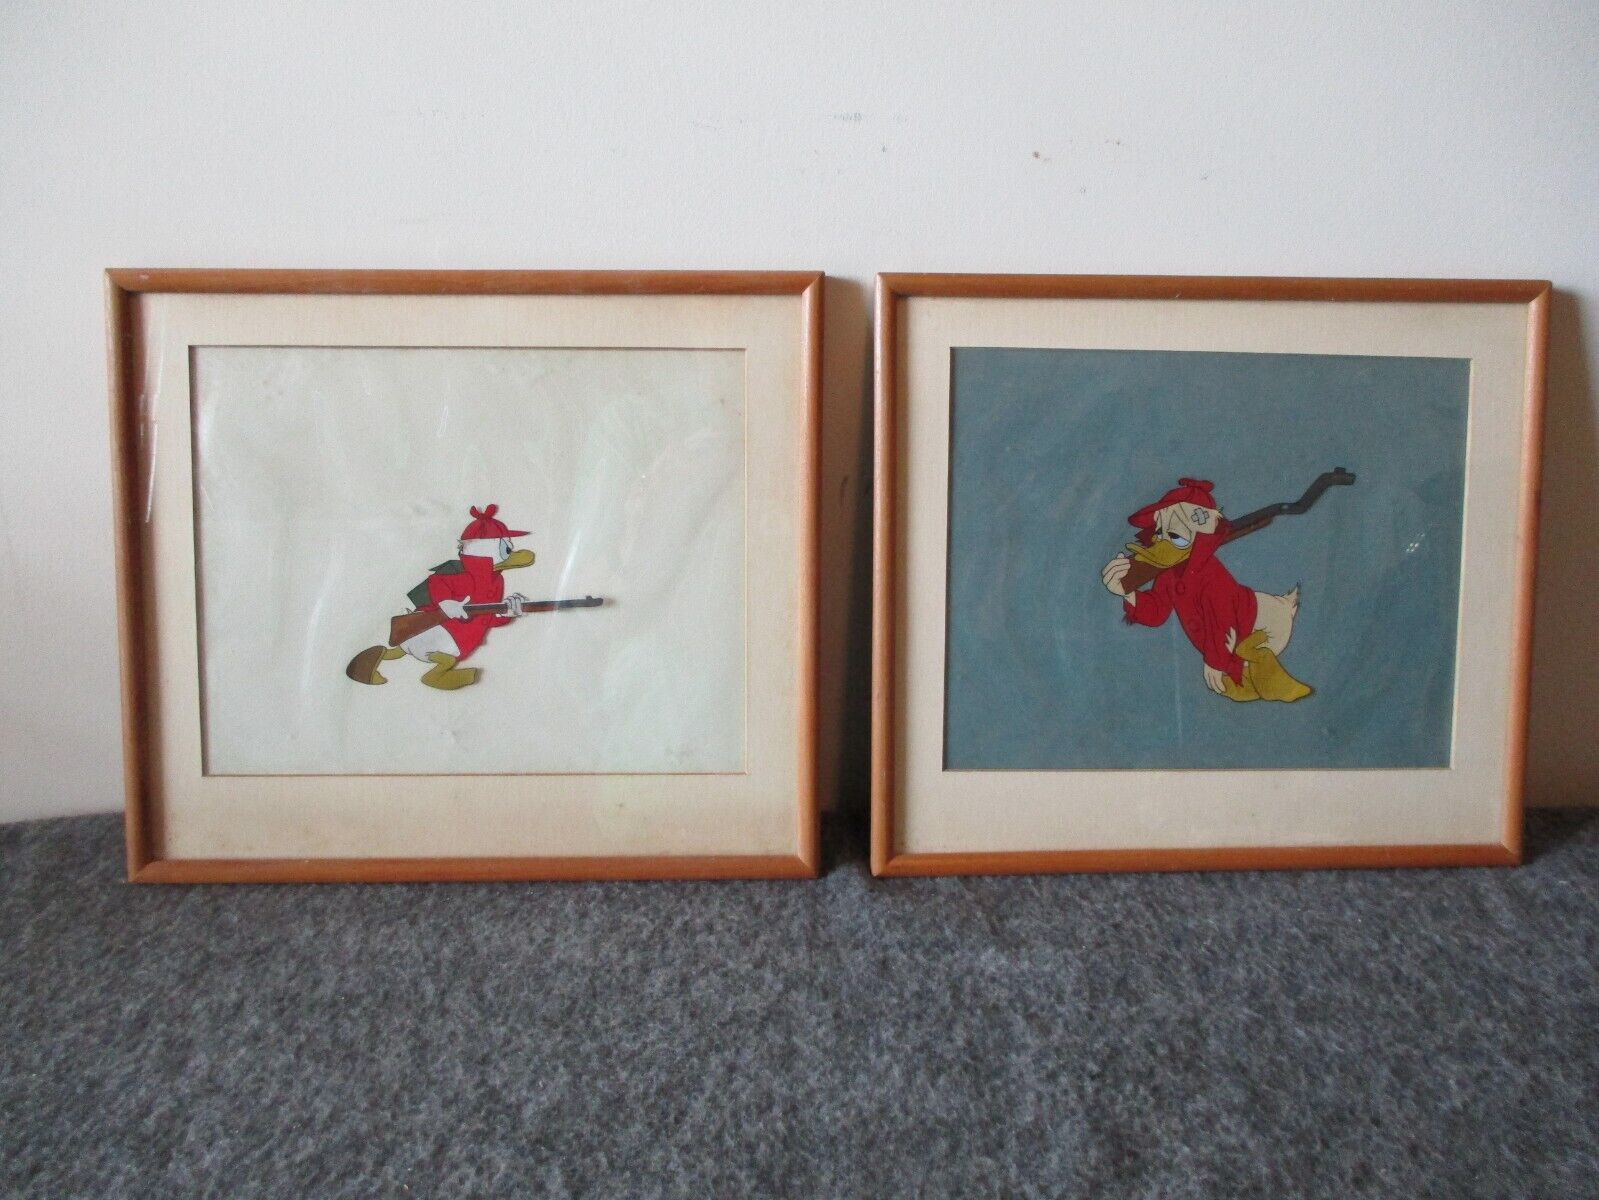 WALT DISNEY PRODUCTIONS ORIG CELLULOID PAINTINGS(2) DONALD DUCK-NO HUNTING-1950s